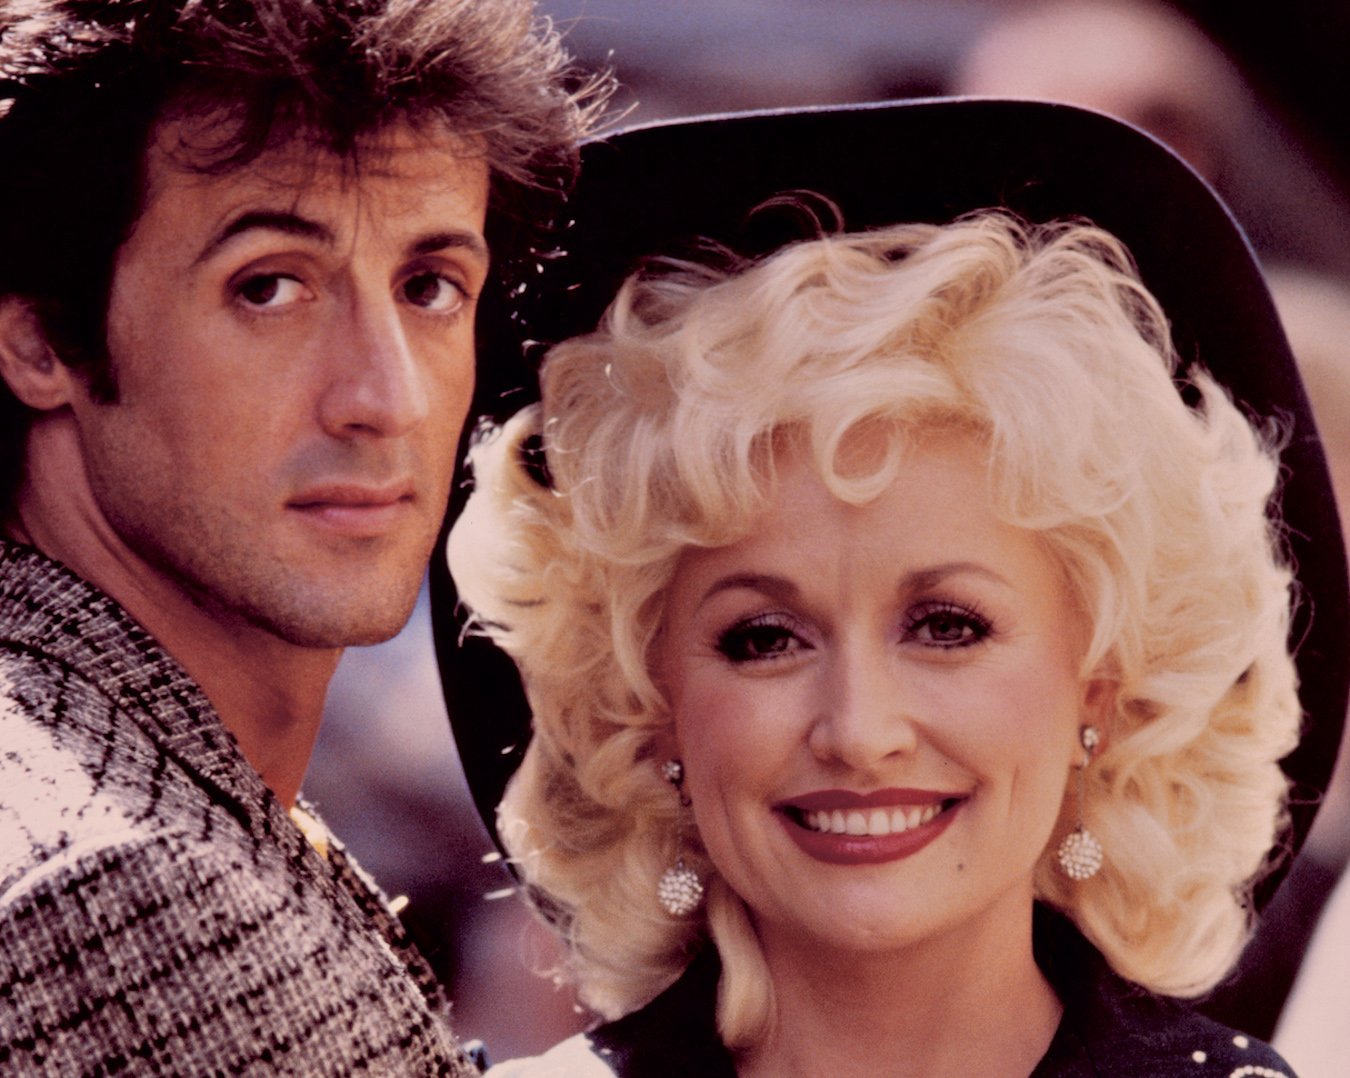 Sylvester Stallone looks at the camera standing next to a smiling Dolly Parton on the set of 'Rhinestone'